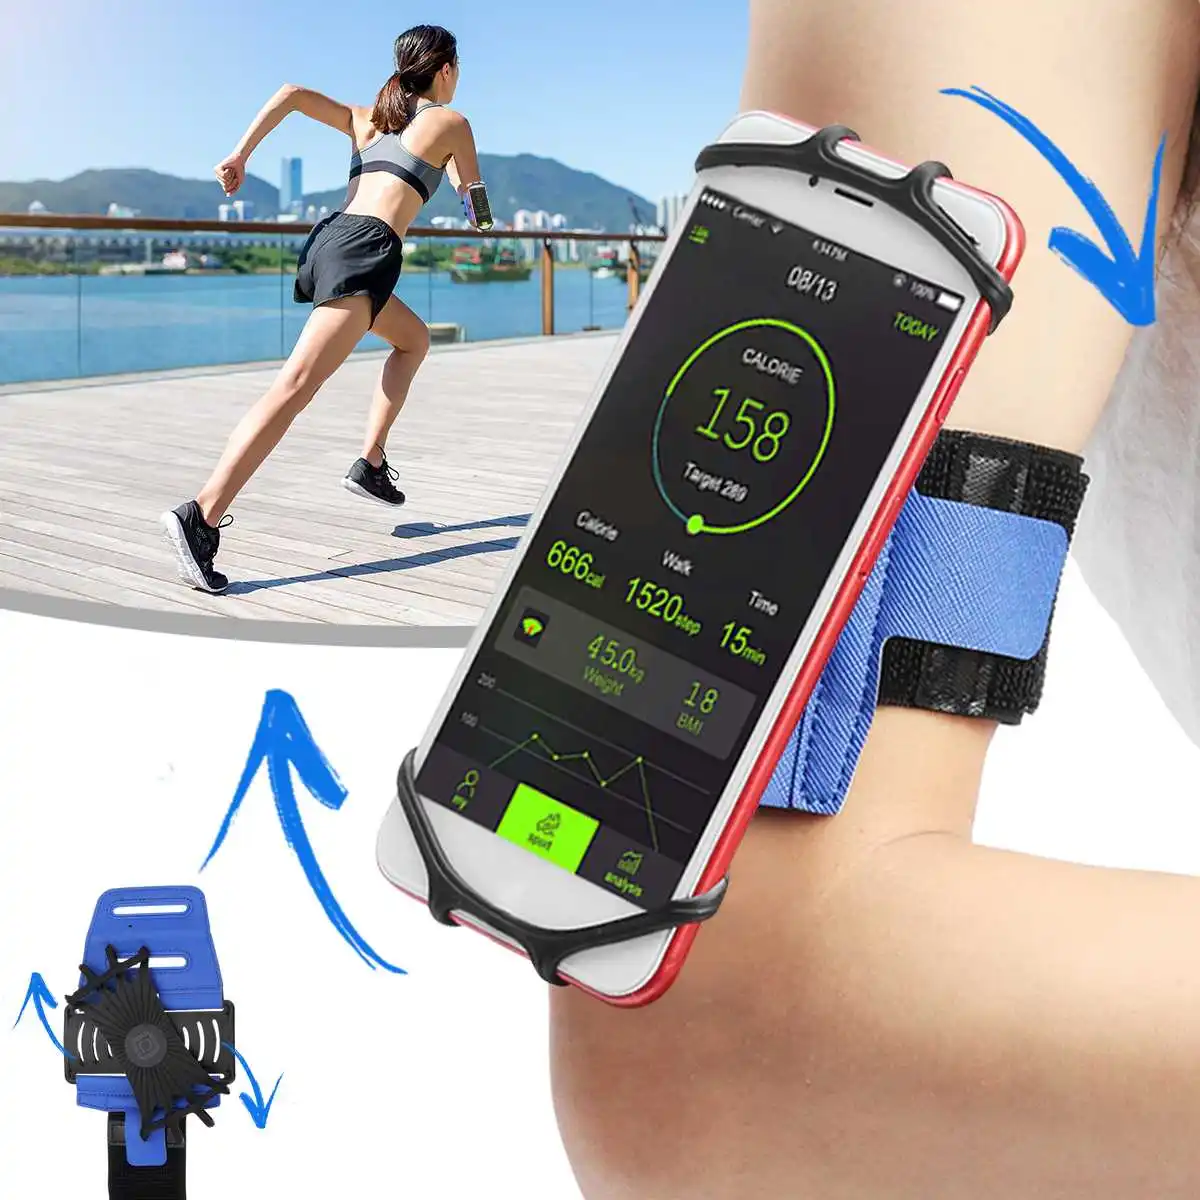 Universal Waterproof Phone Bag Case Running Sports Armband for iPhone Case Cover Holder Arm Band Wrist for 4-6 Inch Smartphone